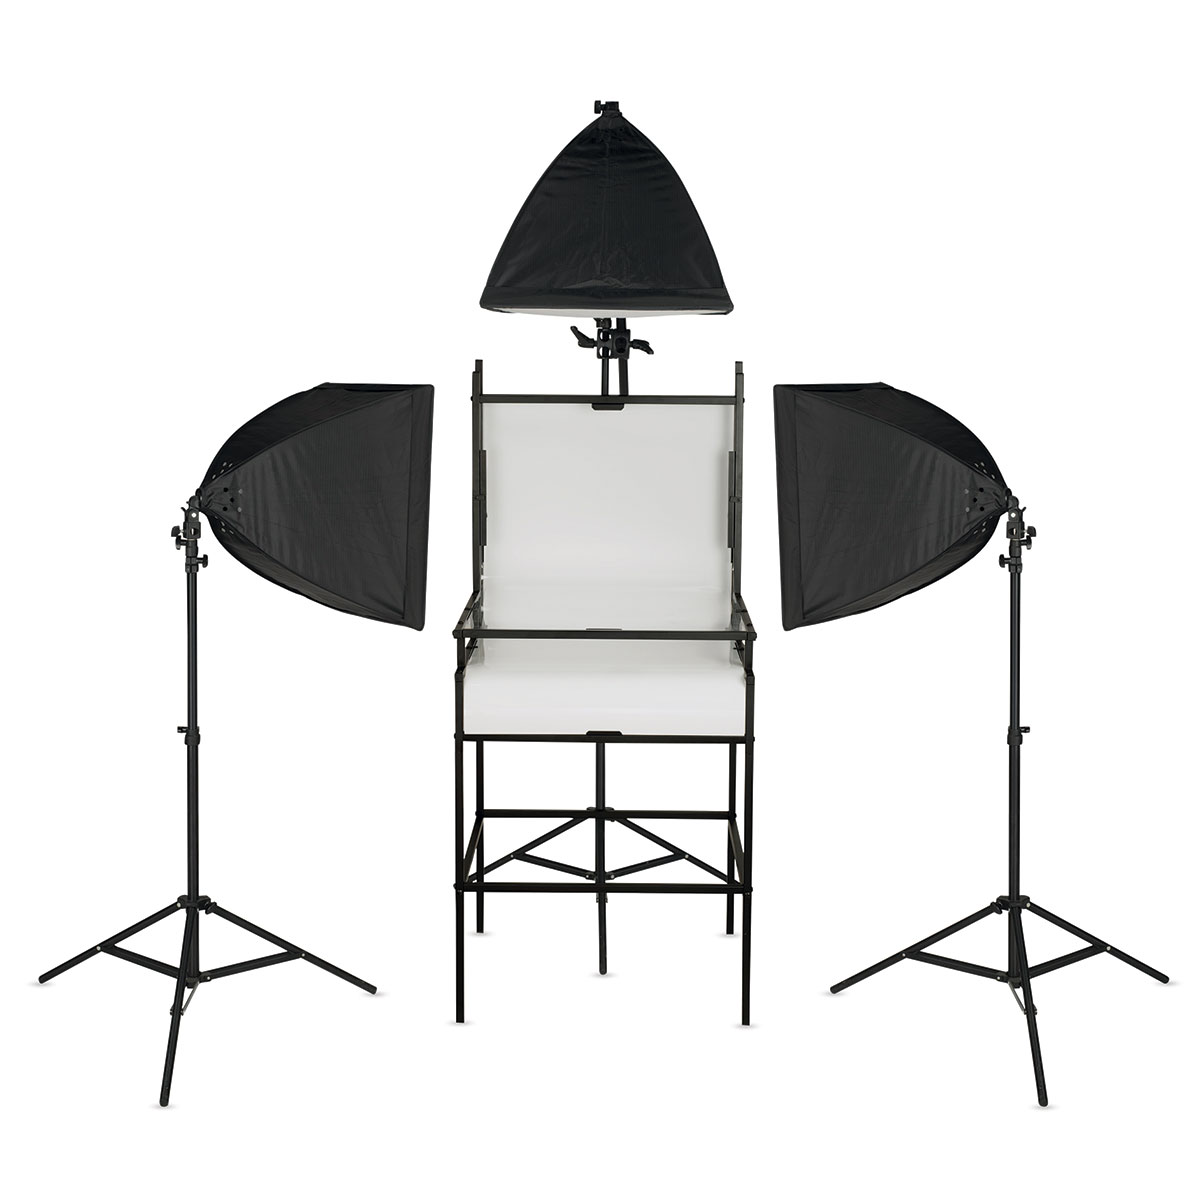 Smith-Victor Floor Stand Photo Shooting Table Complete Kit - With 3 LED Softbox Lights